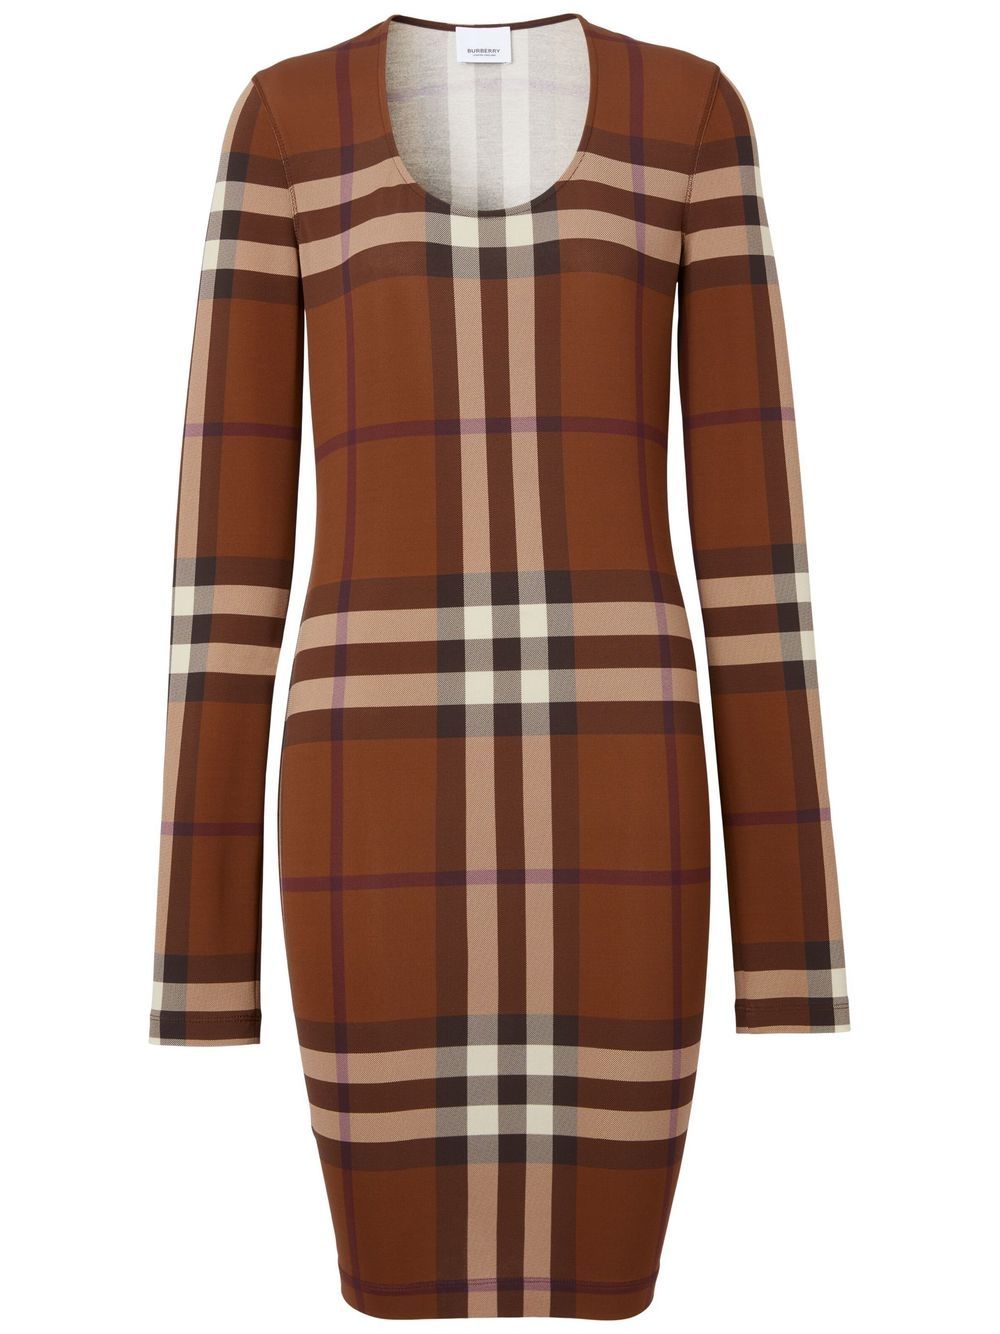 Burberry Exaggerated-Check jersey dress - Brown